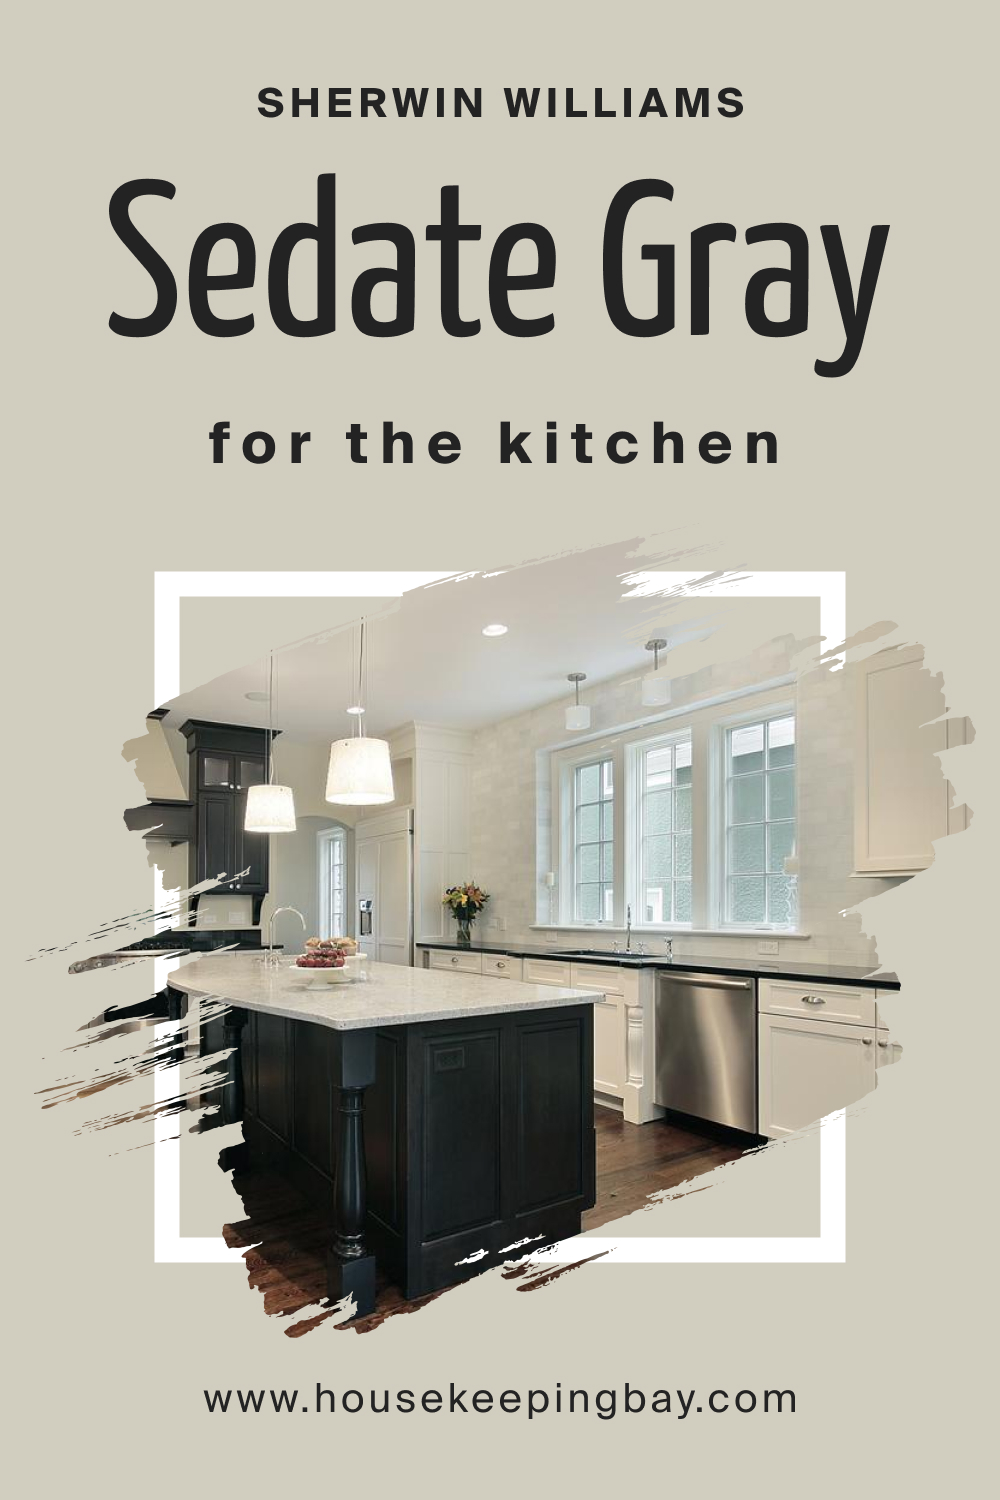 Sherwin Williams. SW 6169 Sedate Gray For the Kitchens